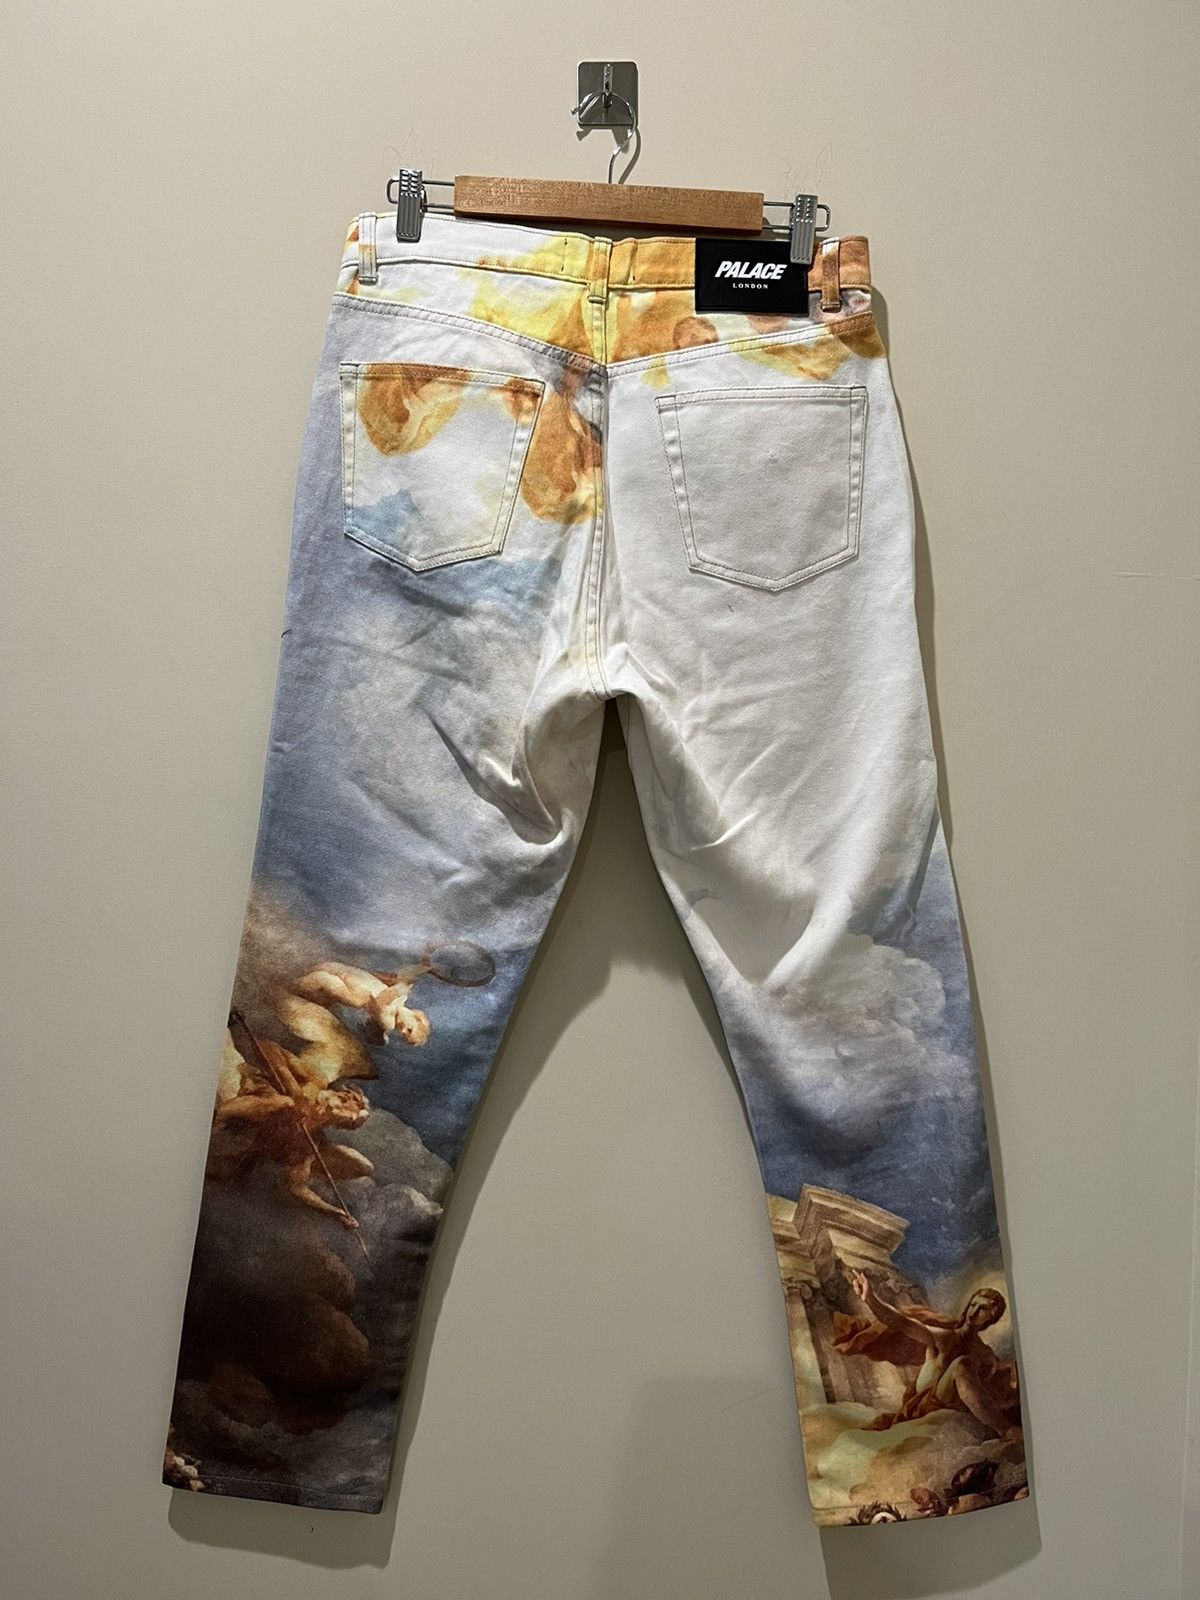 Palace Palace Persailles Denim Jeans | Grailed